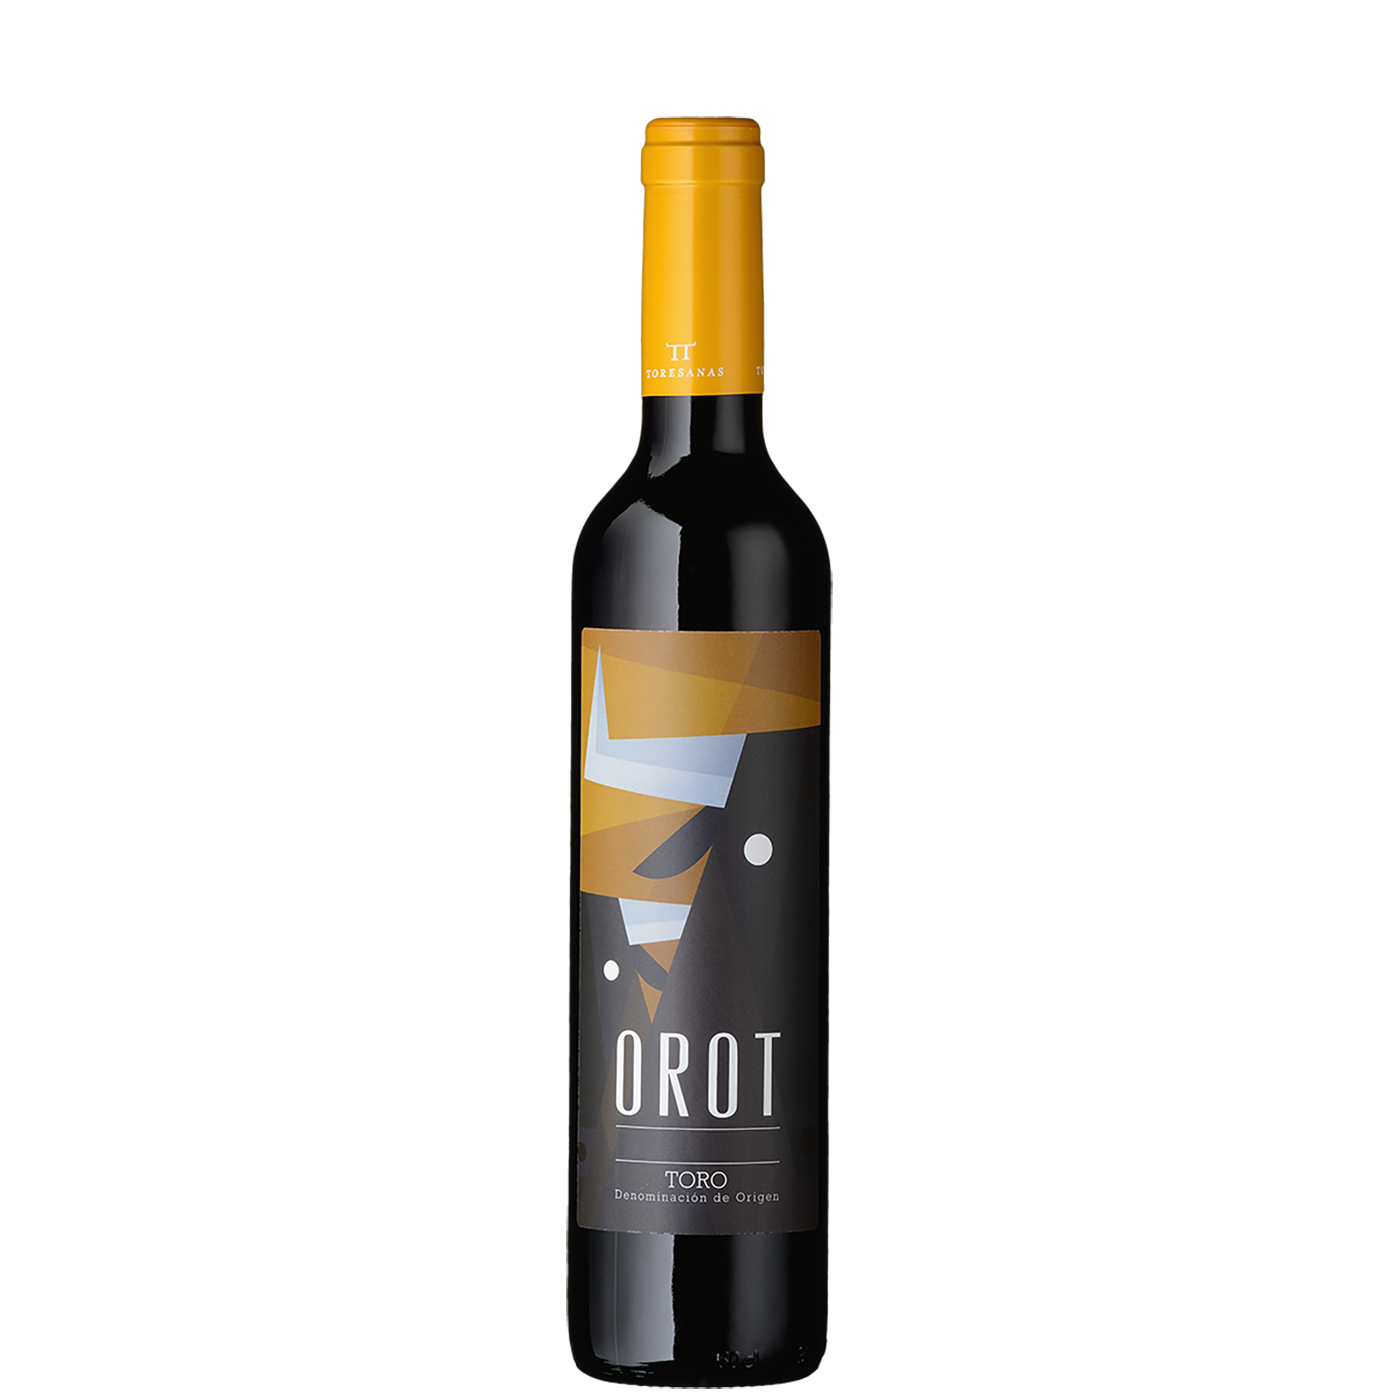 OROT, Roble